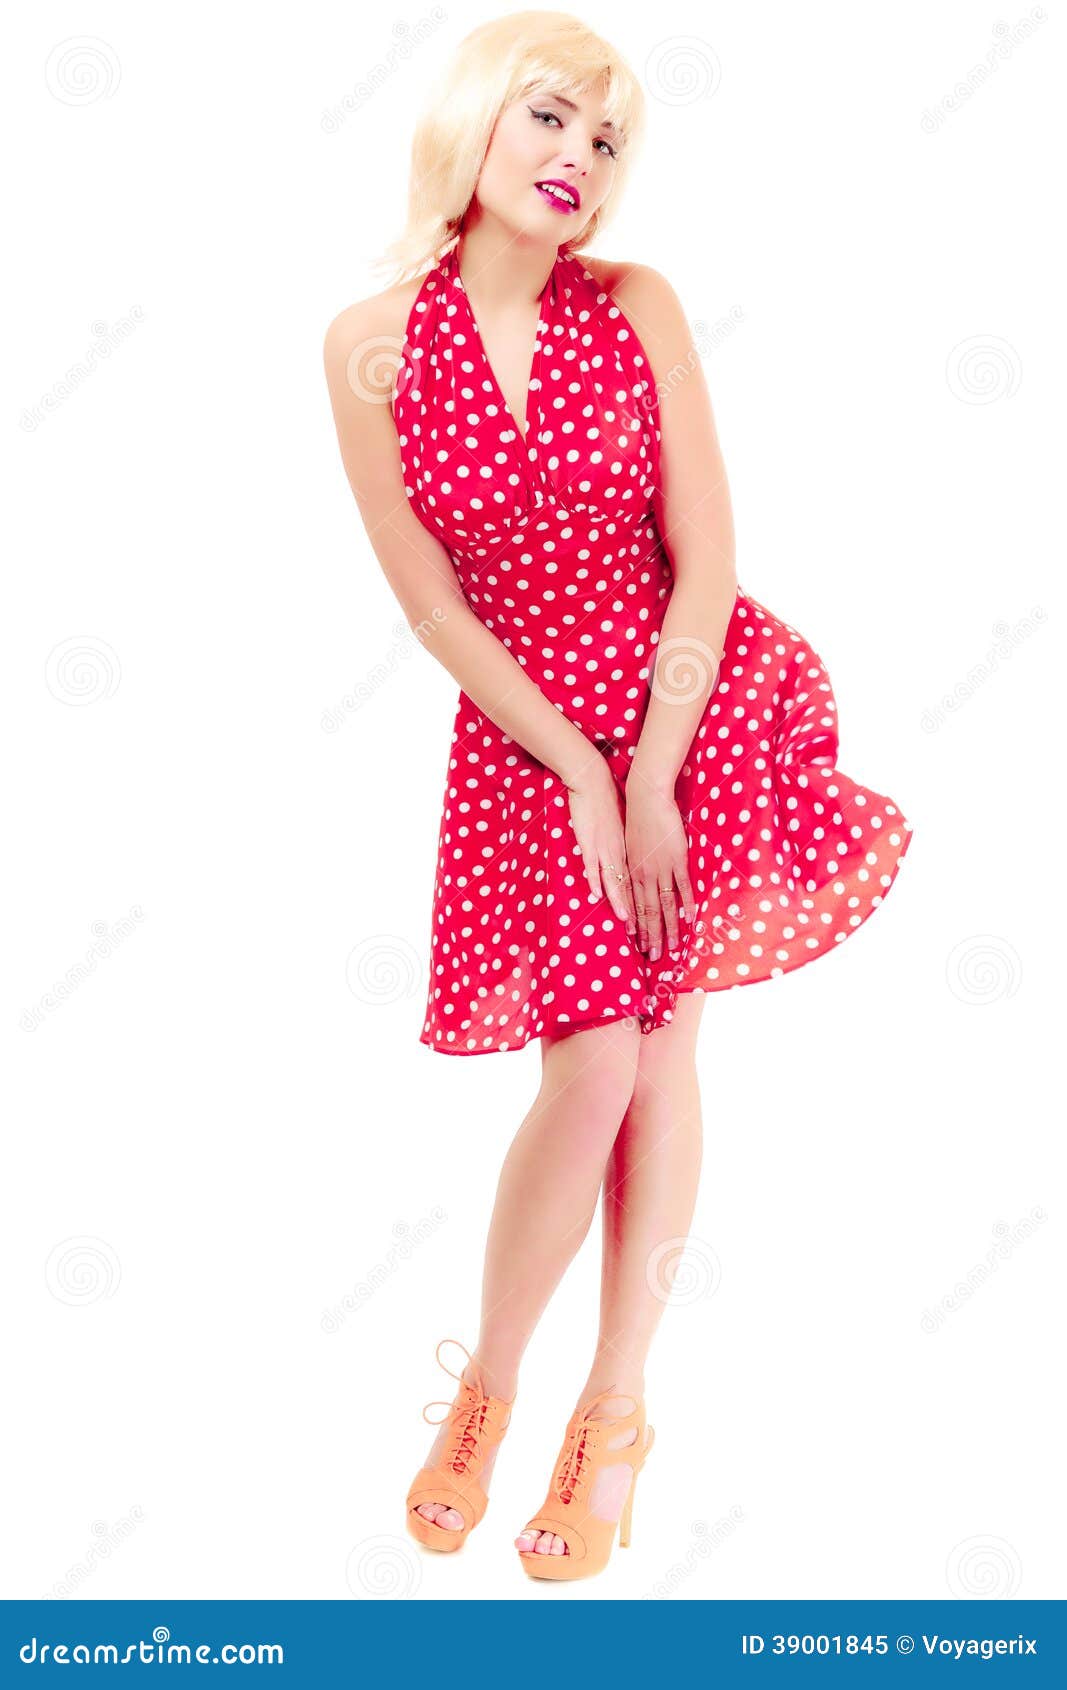 Full Length Pinup Girl in Blond Wig Retro Dress Stock Image - Image of ...